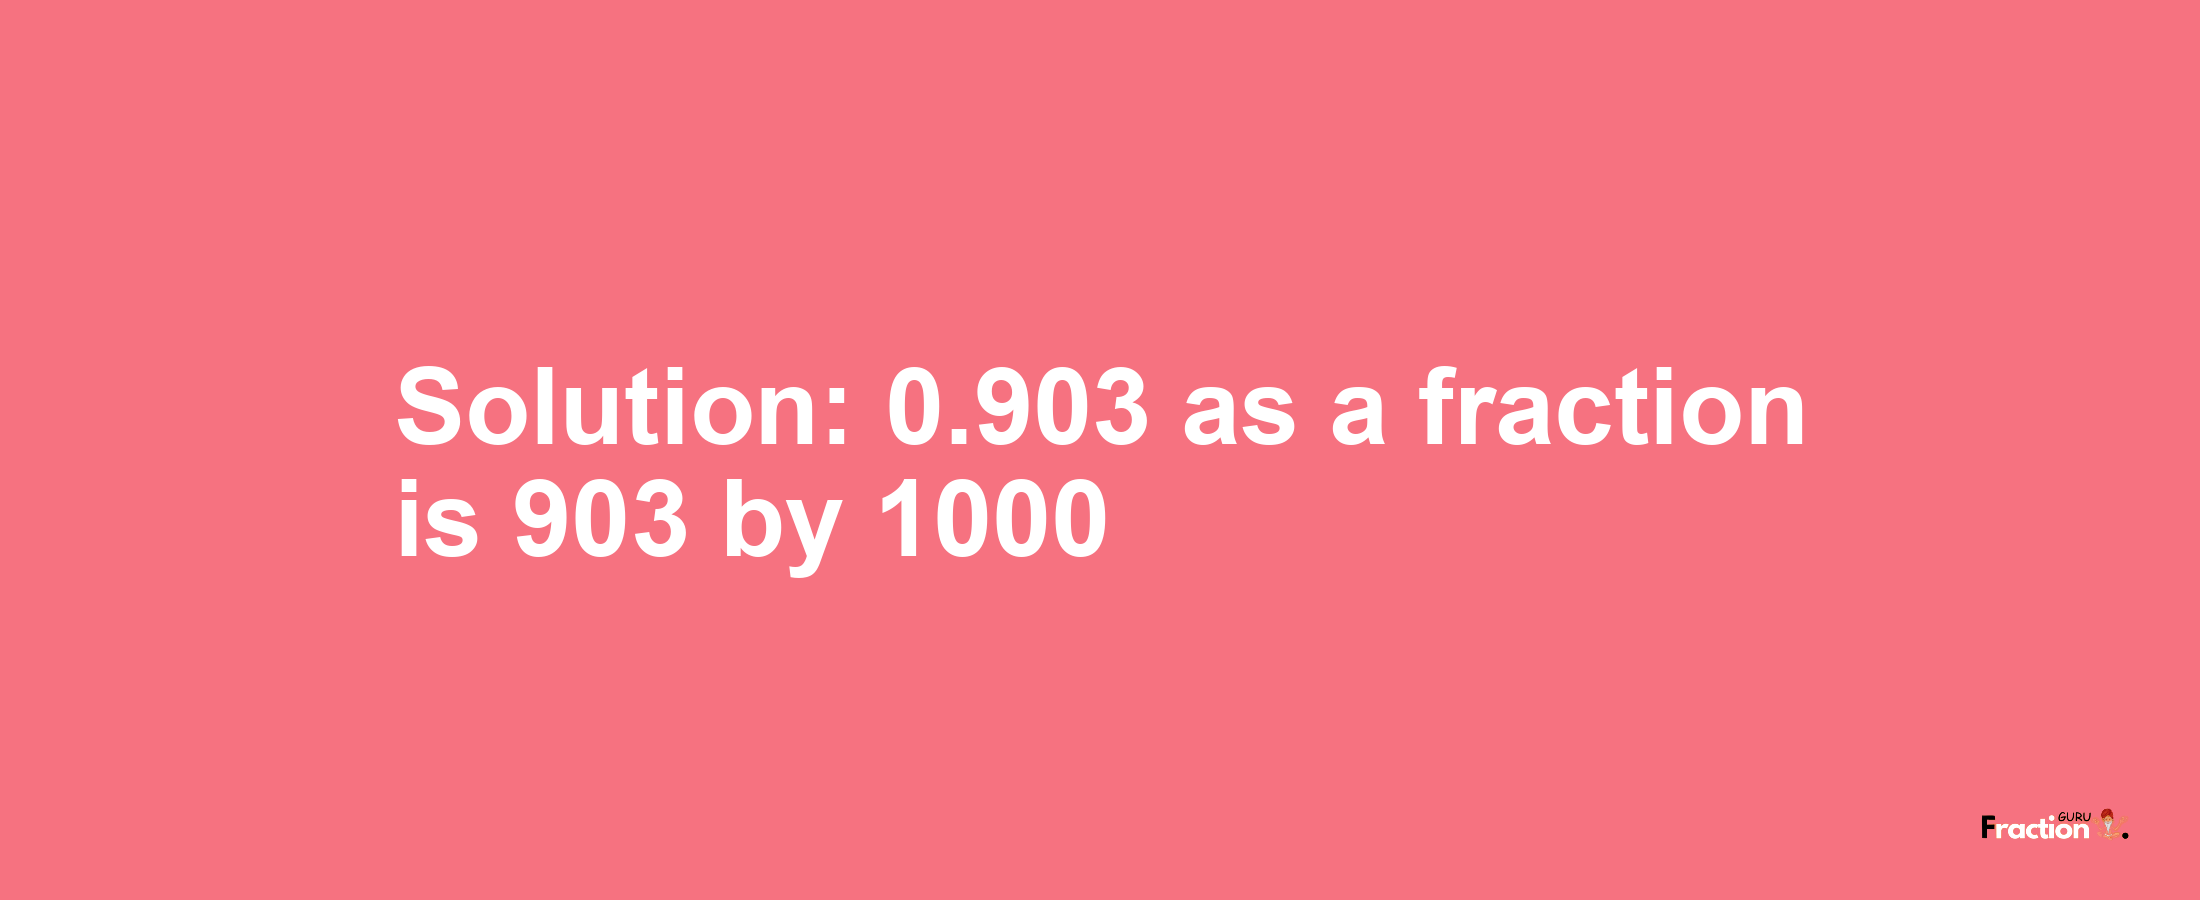 Solution:0.903 as a fraction is 903/1000